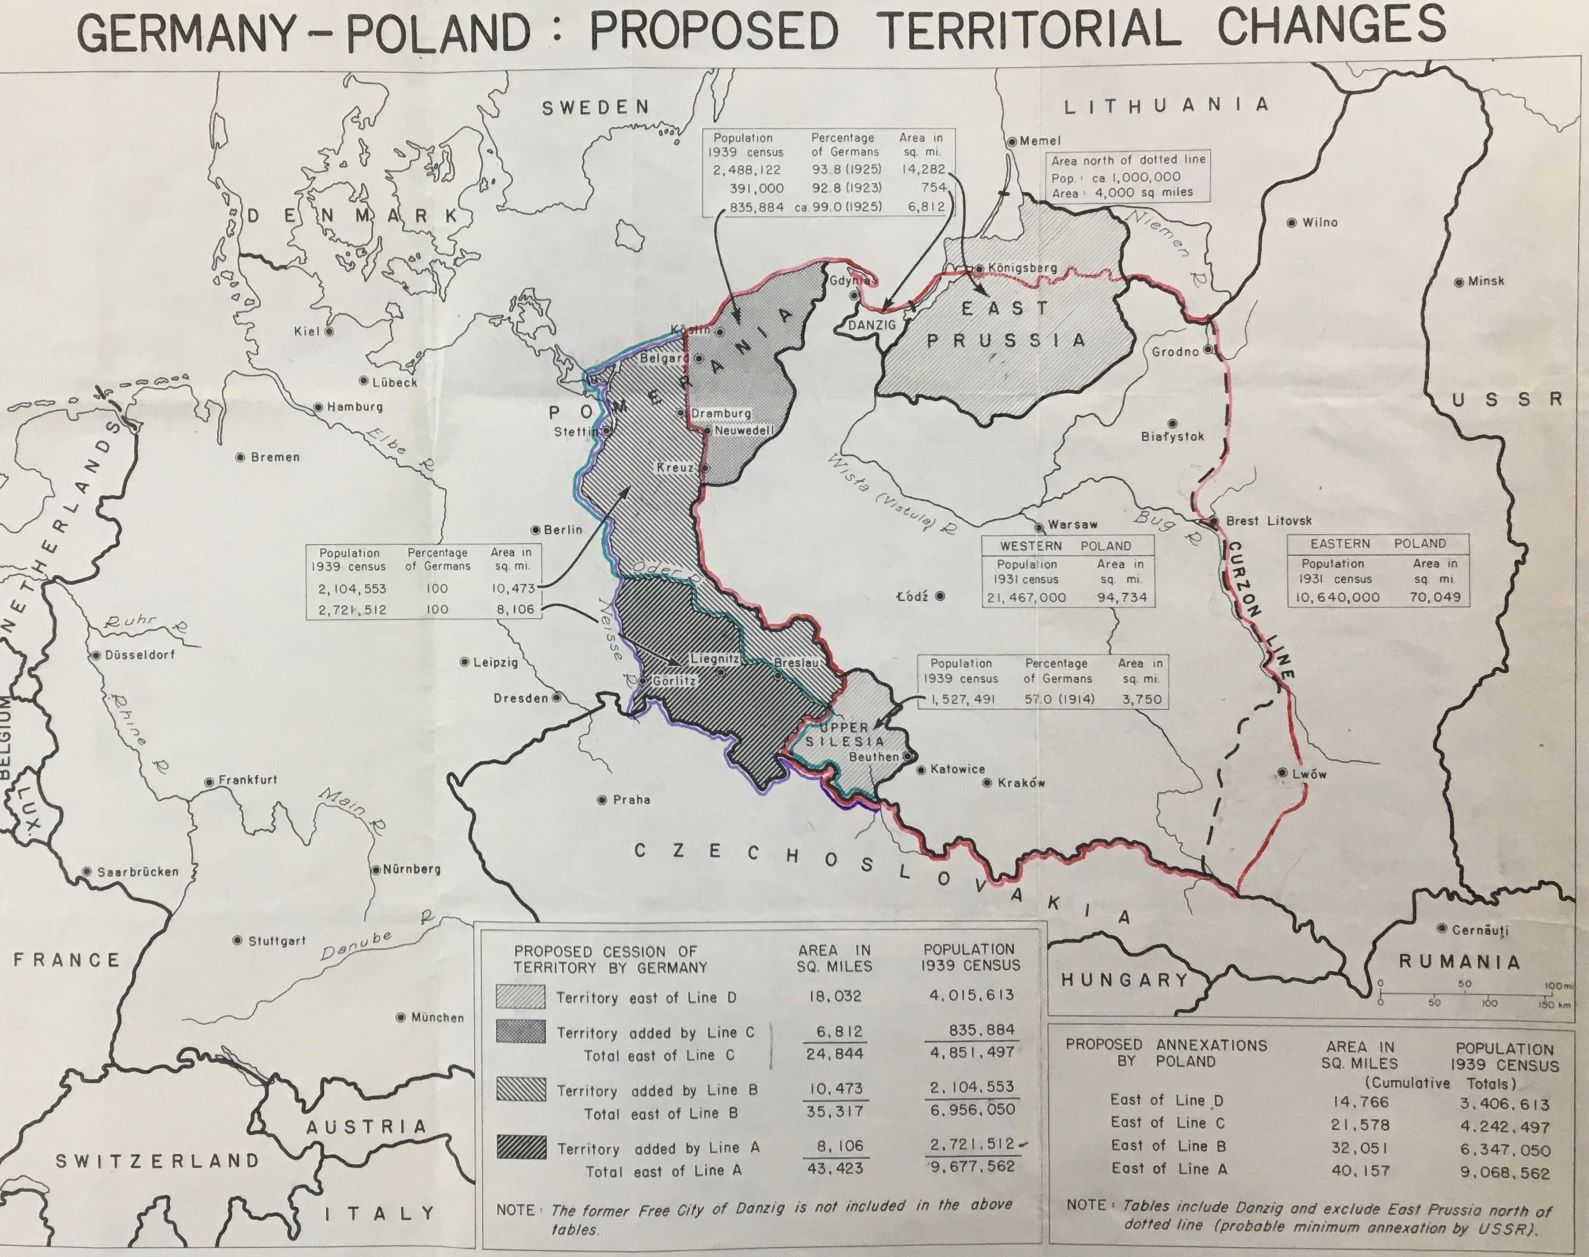 Black and white map detailing the revised borders of the Polish state as agreed by the British, American and Soviet delegations at the Yalta Conference, February 1945.